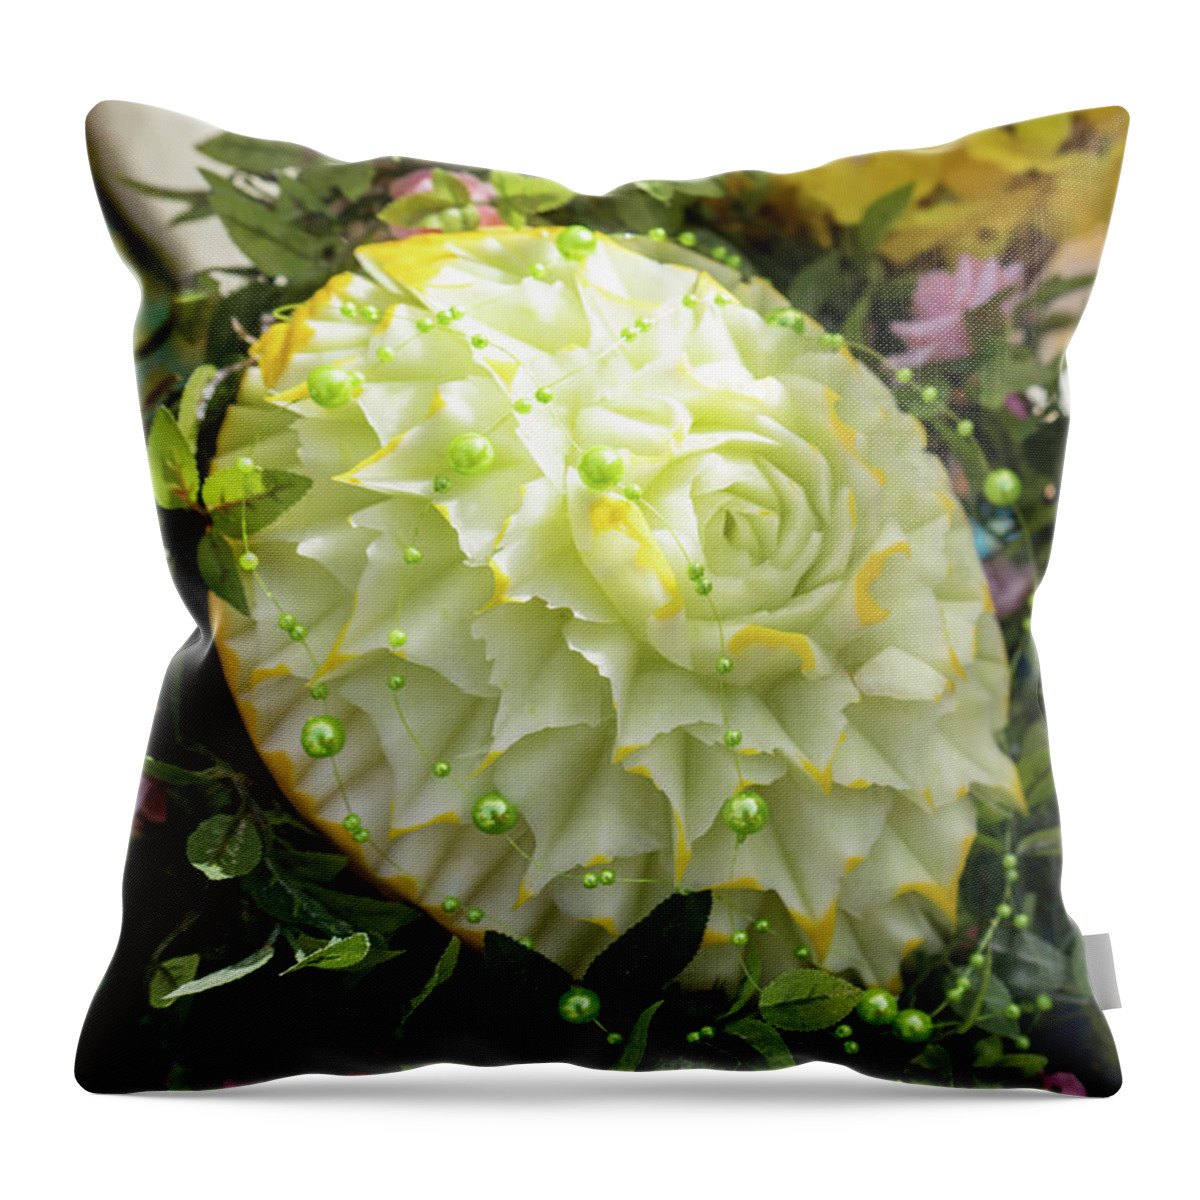 Carved Melon Throw Pillow featuring the photograph Extravagant Jeweled Dishes - Carved Melon Flower With Green Pearls by Georgia Mizuleva